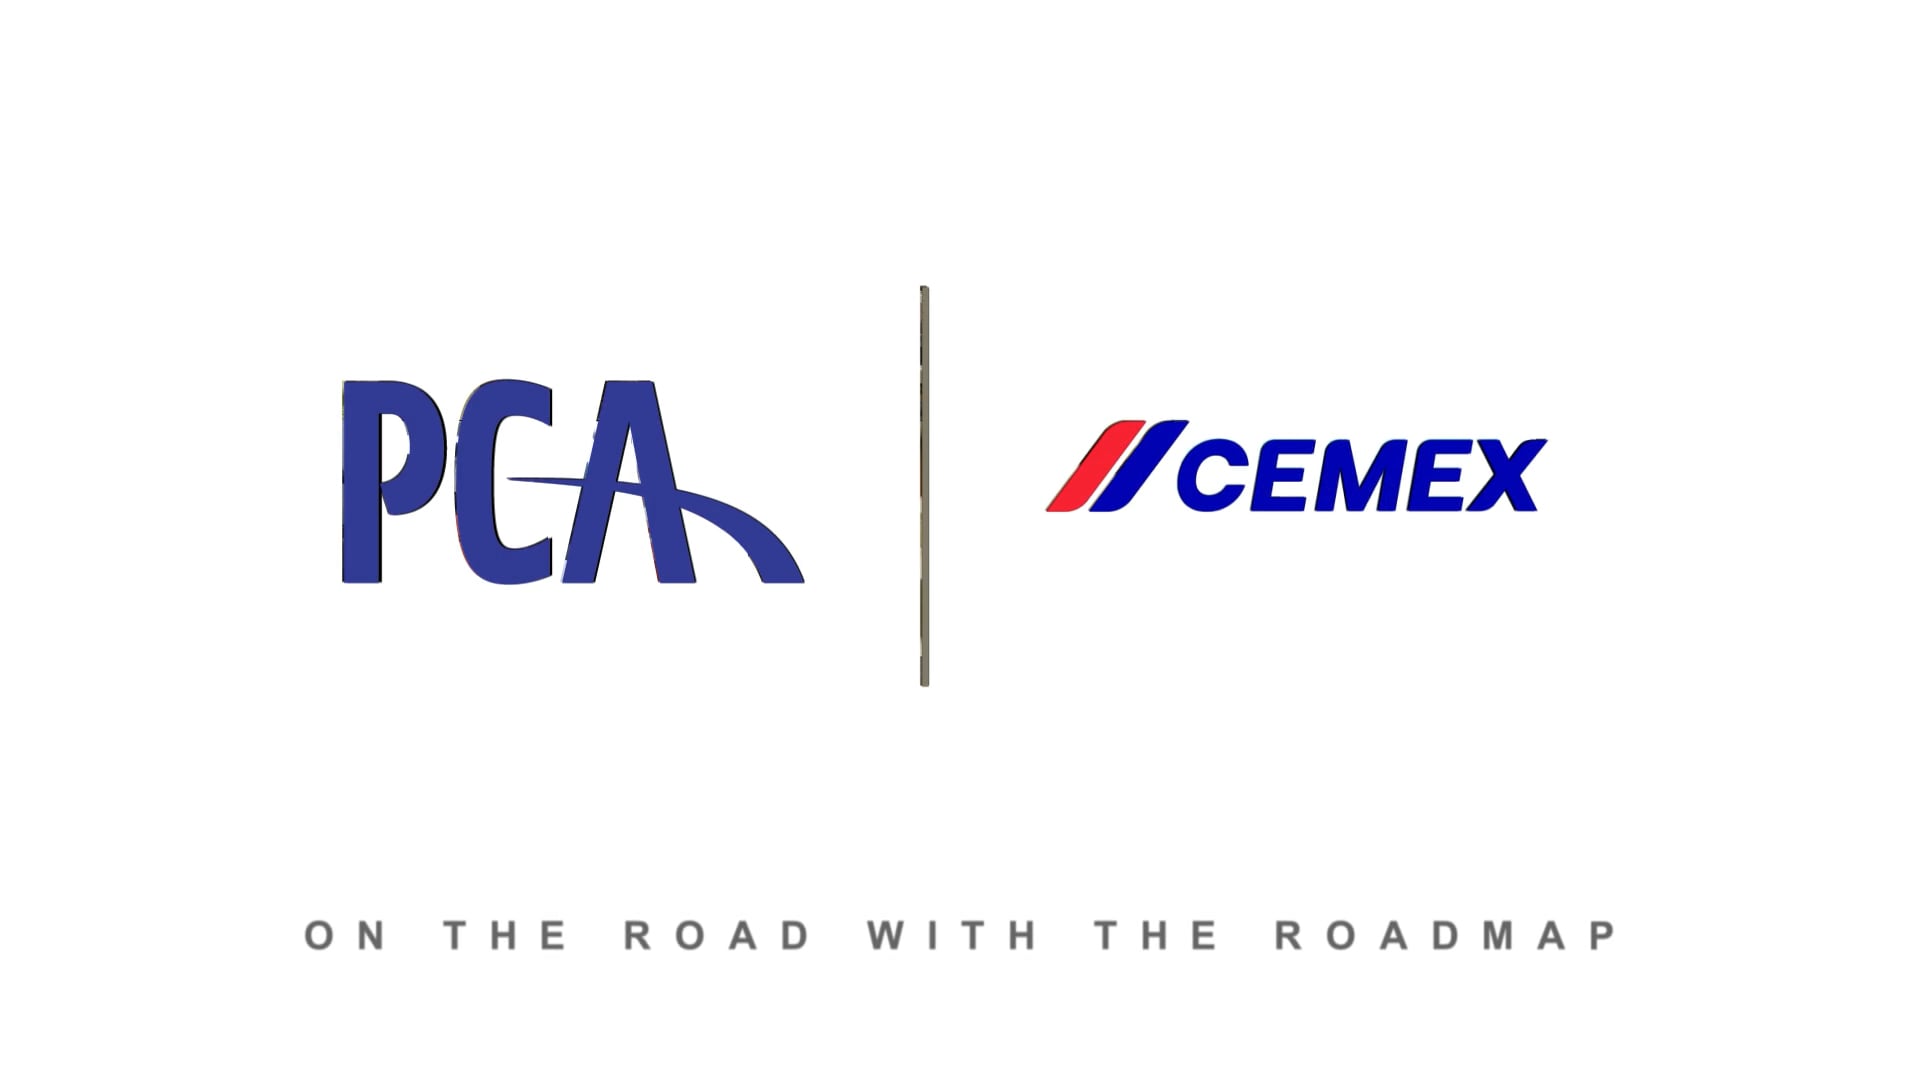 Jaime Muguiro of Cemex USA – On the Road with the Roadmap